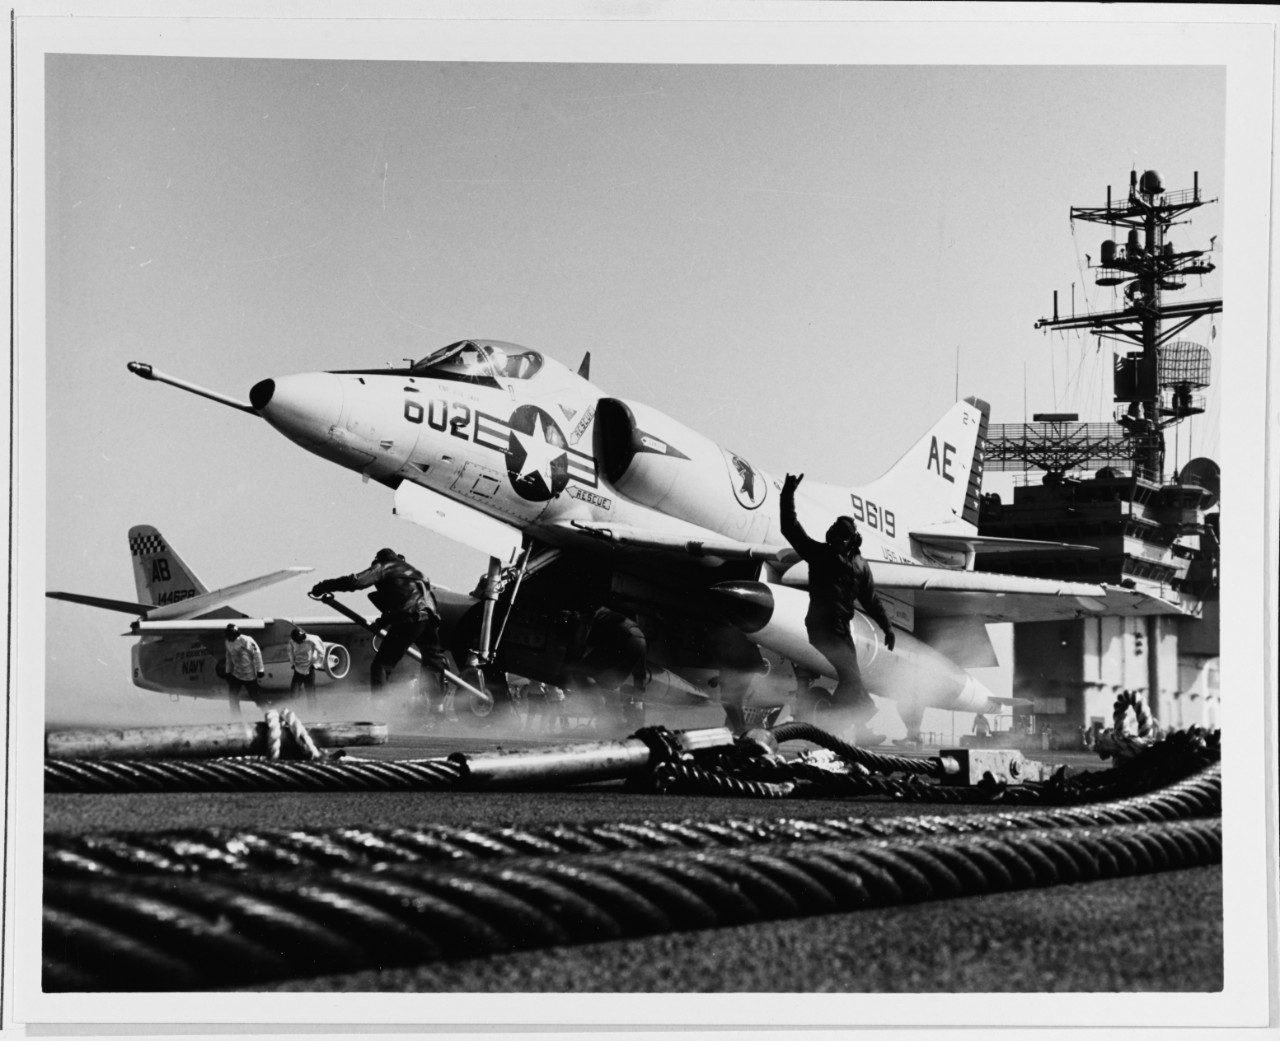 An A-4C "Skyhawk" is positioned on the catapult of the USS AMERICA (CVA-66)